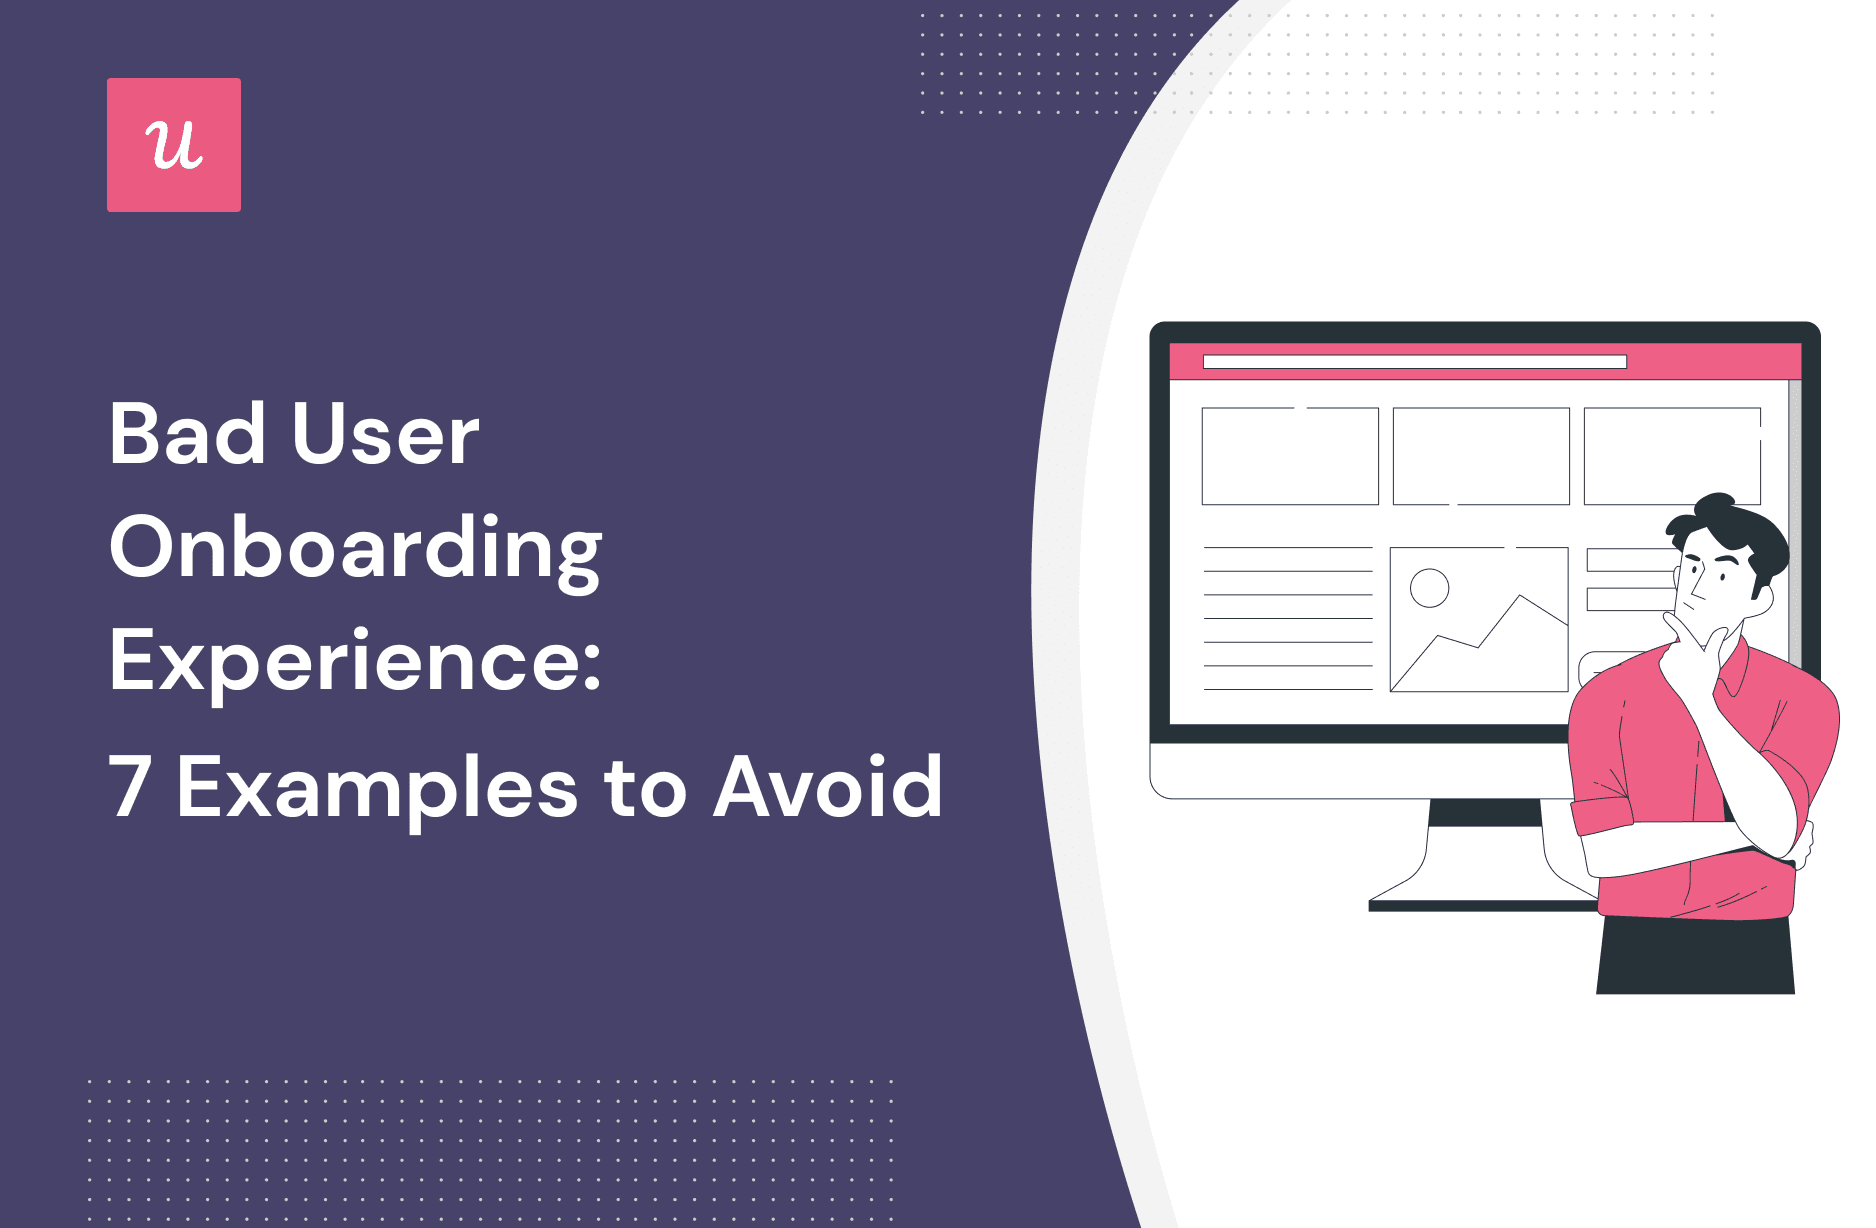 Bad User Onboarding Experience: 7 Examples to Avoid cover